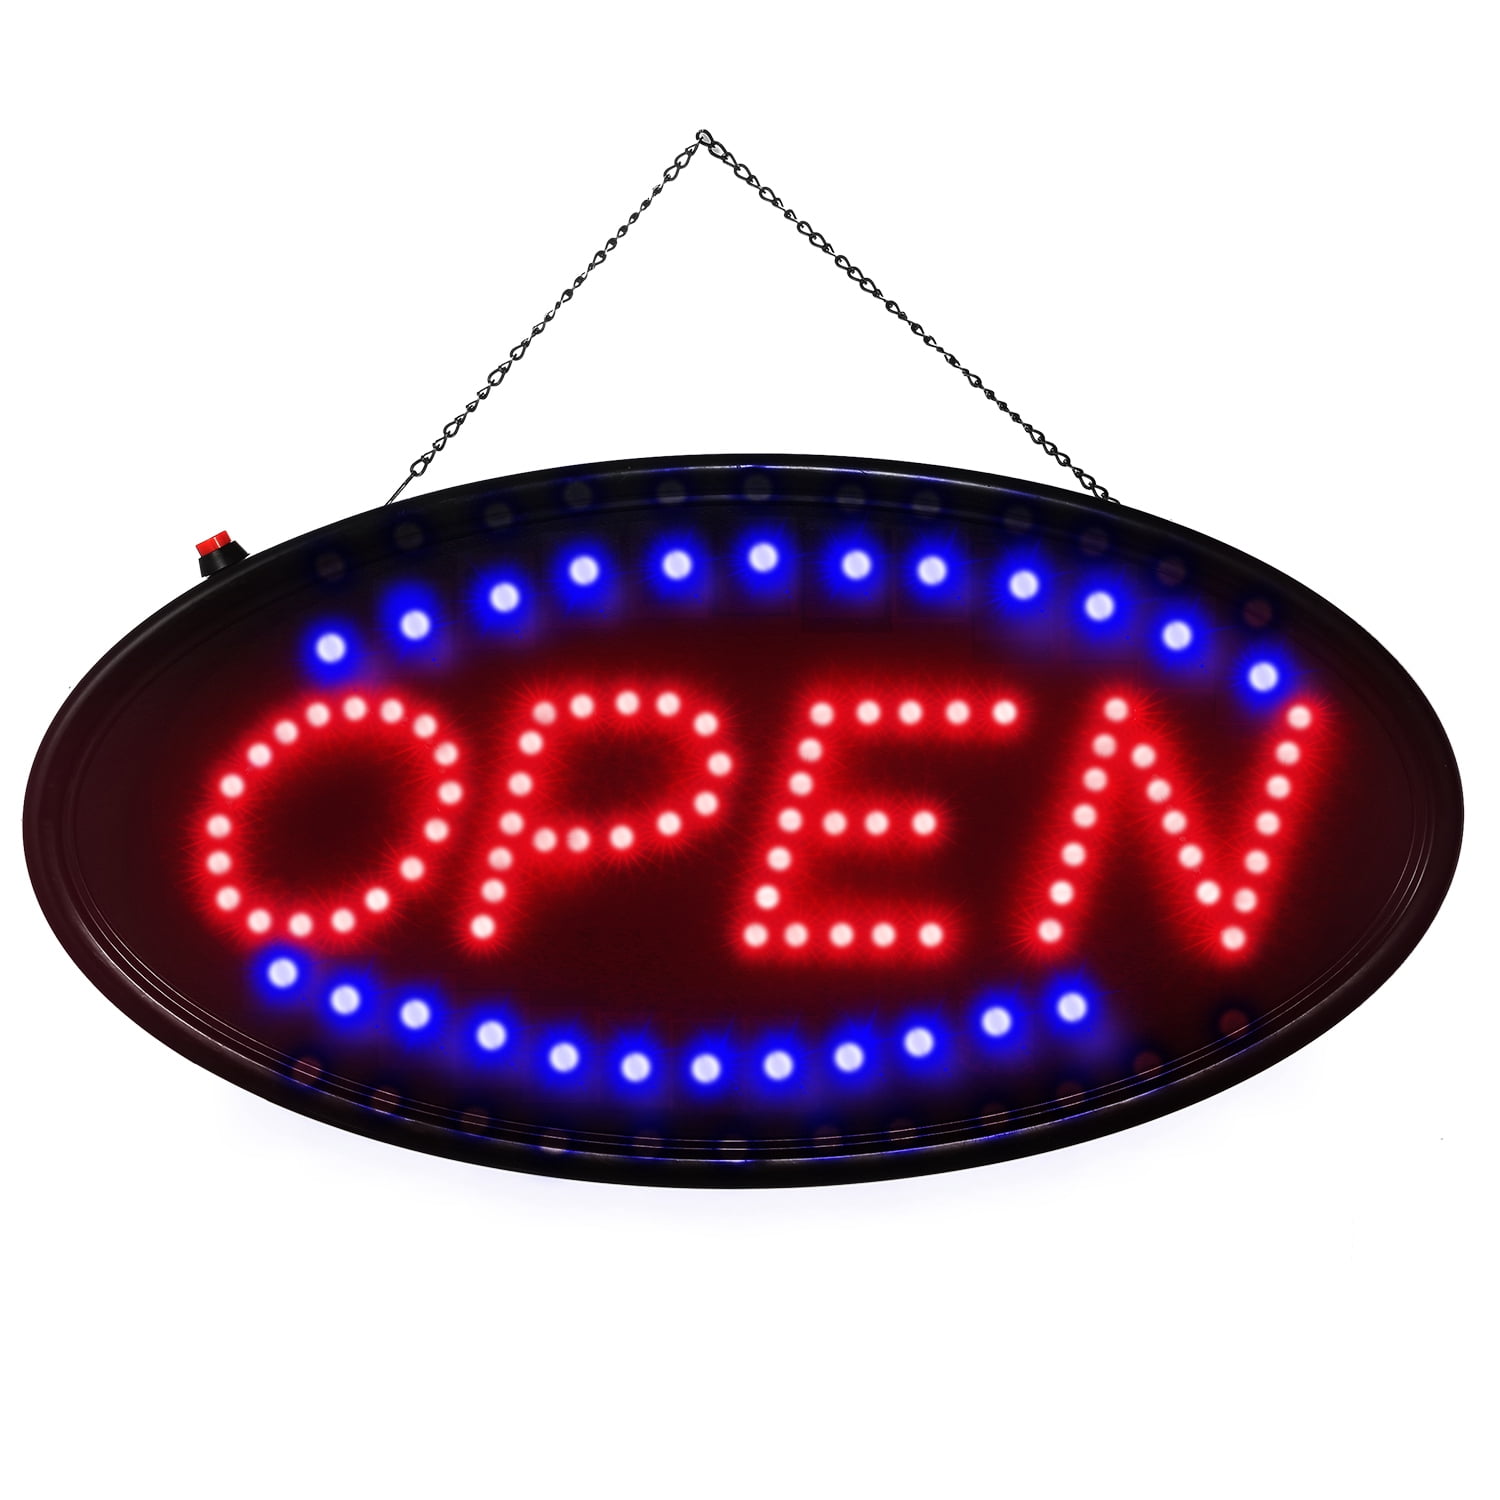 Vertical Open Led Lighted Sign Neon Open Sign for Business 48 X 25 cm, A Advertisement Board Electric Display Sign 19X10 inch Indoor